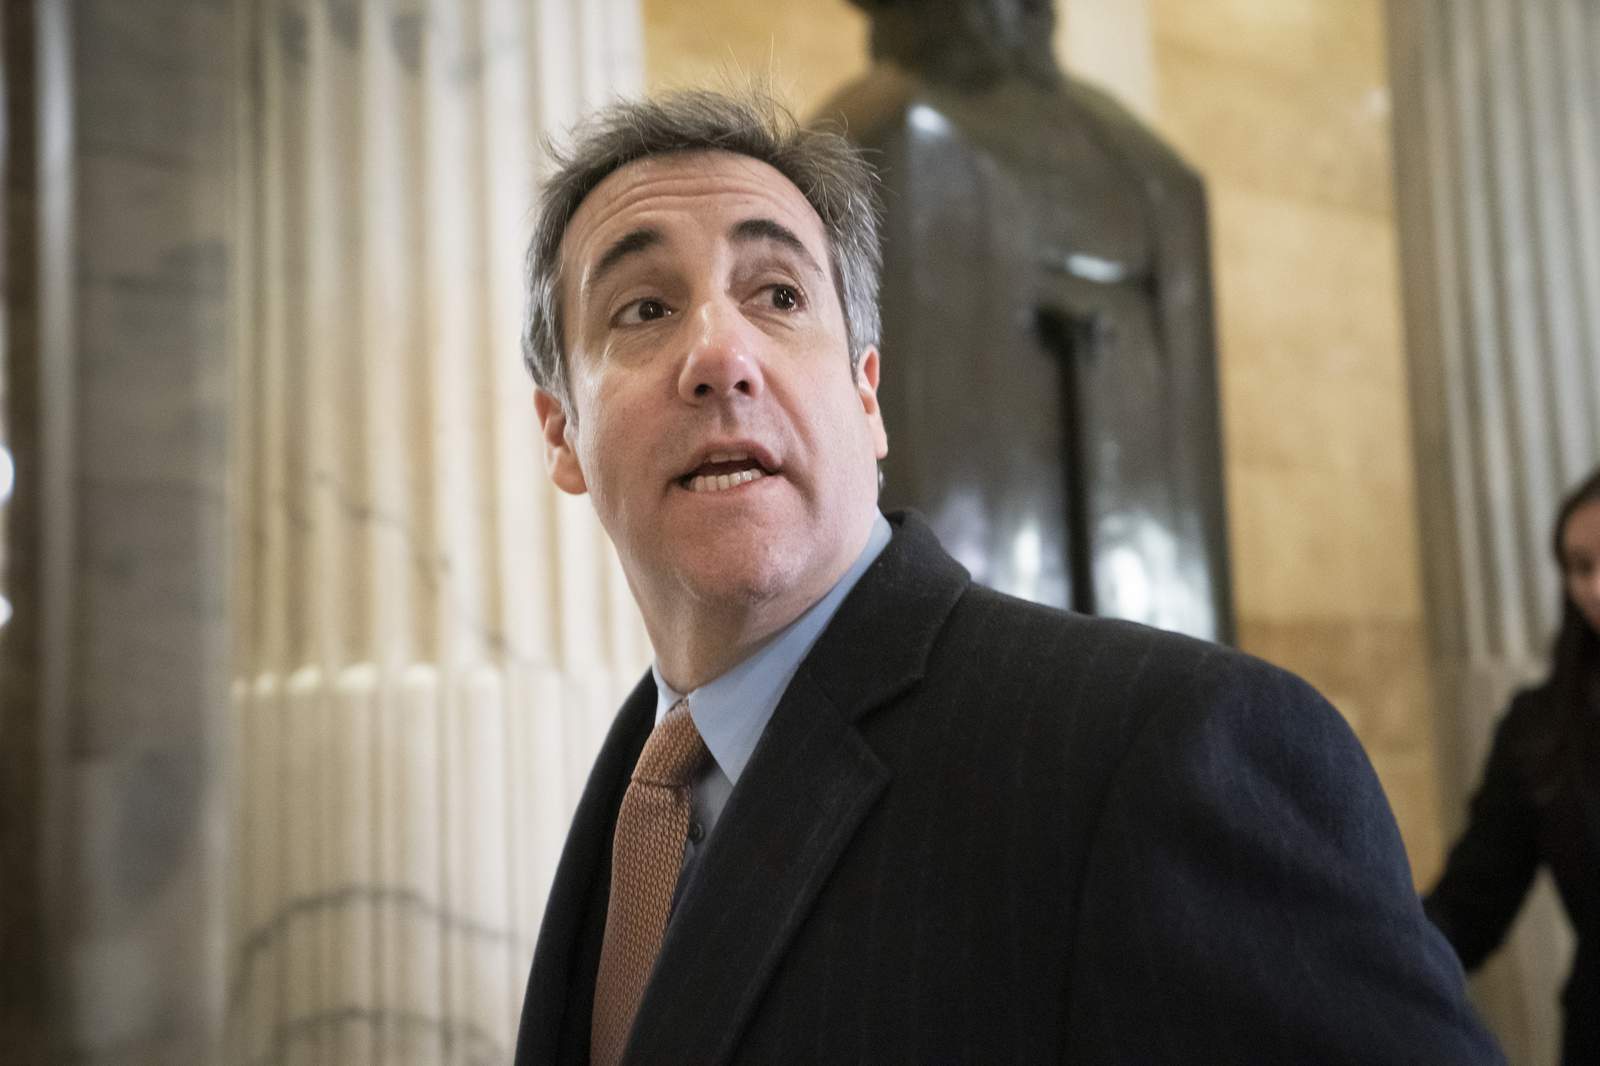 ACLU and lawyers sue to free ex-Trump attorney Michael Cohen